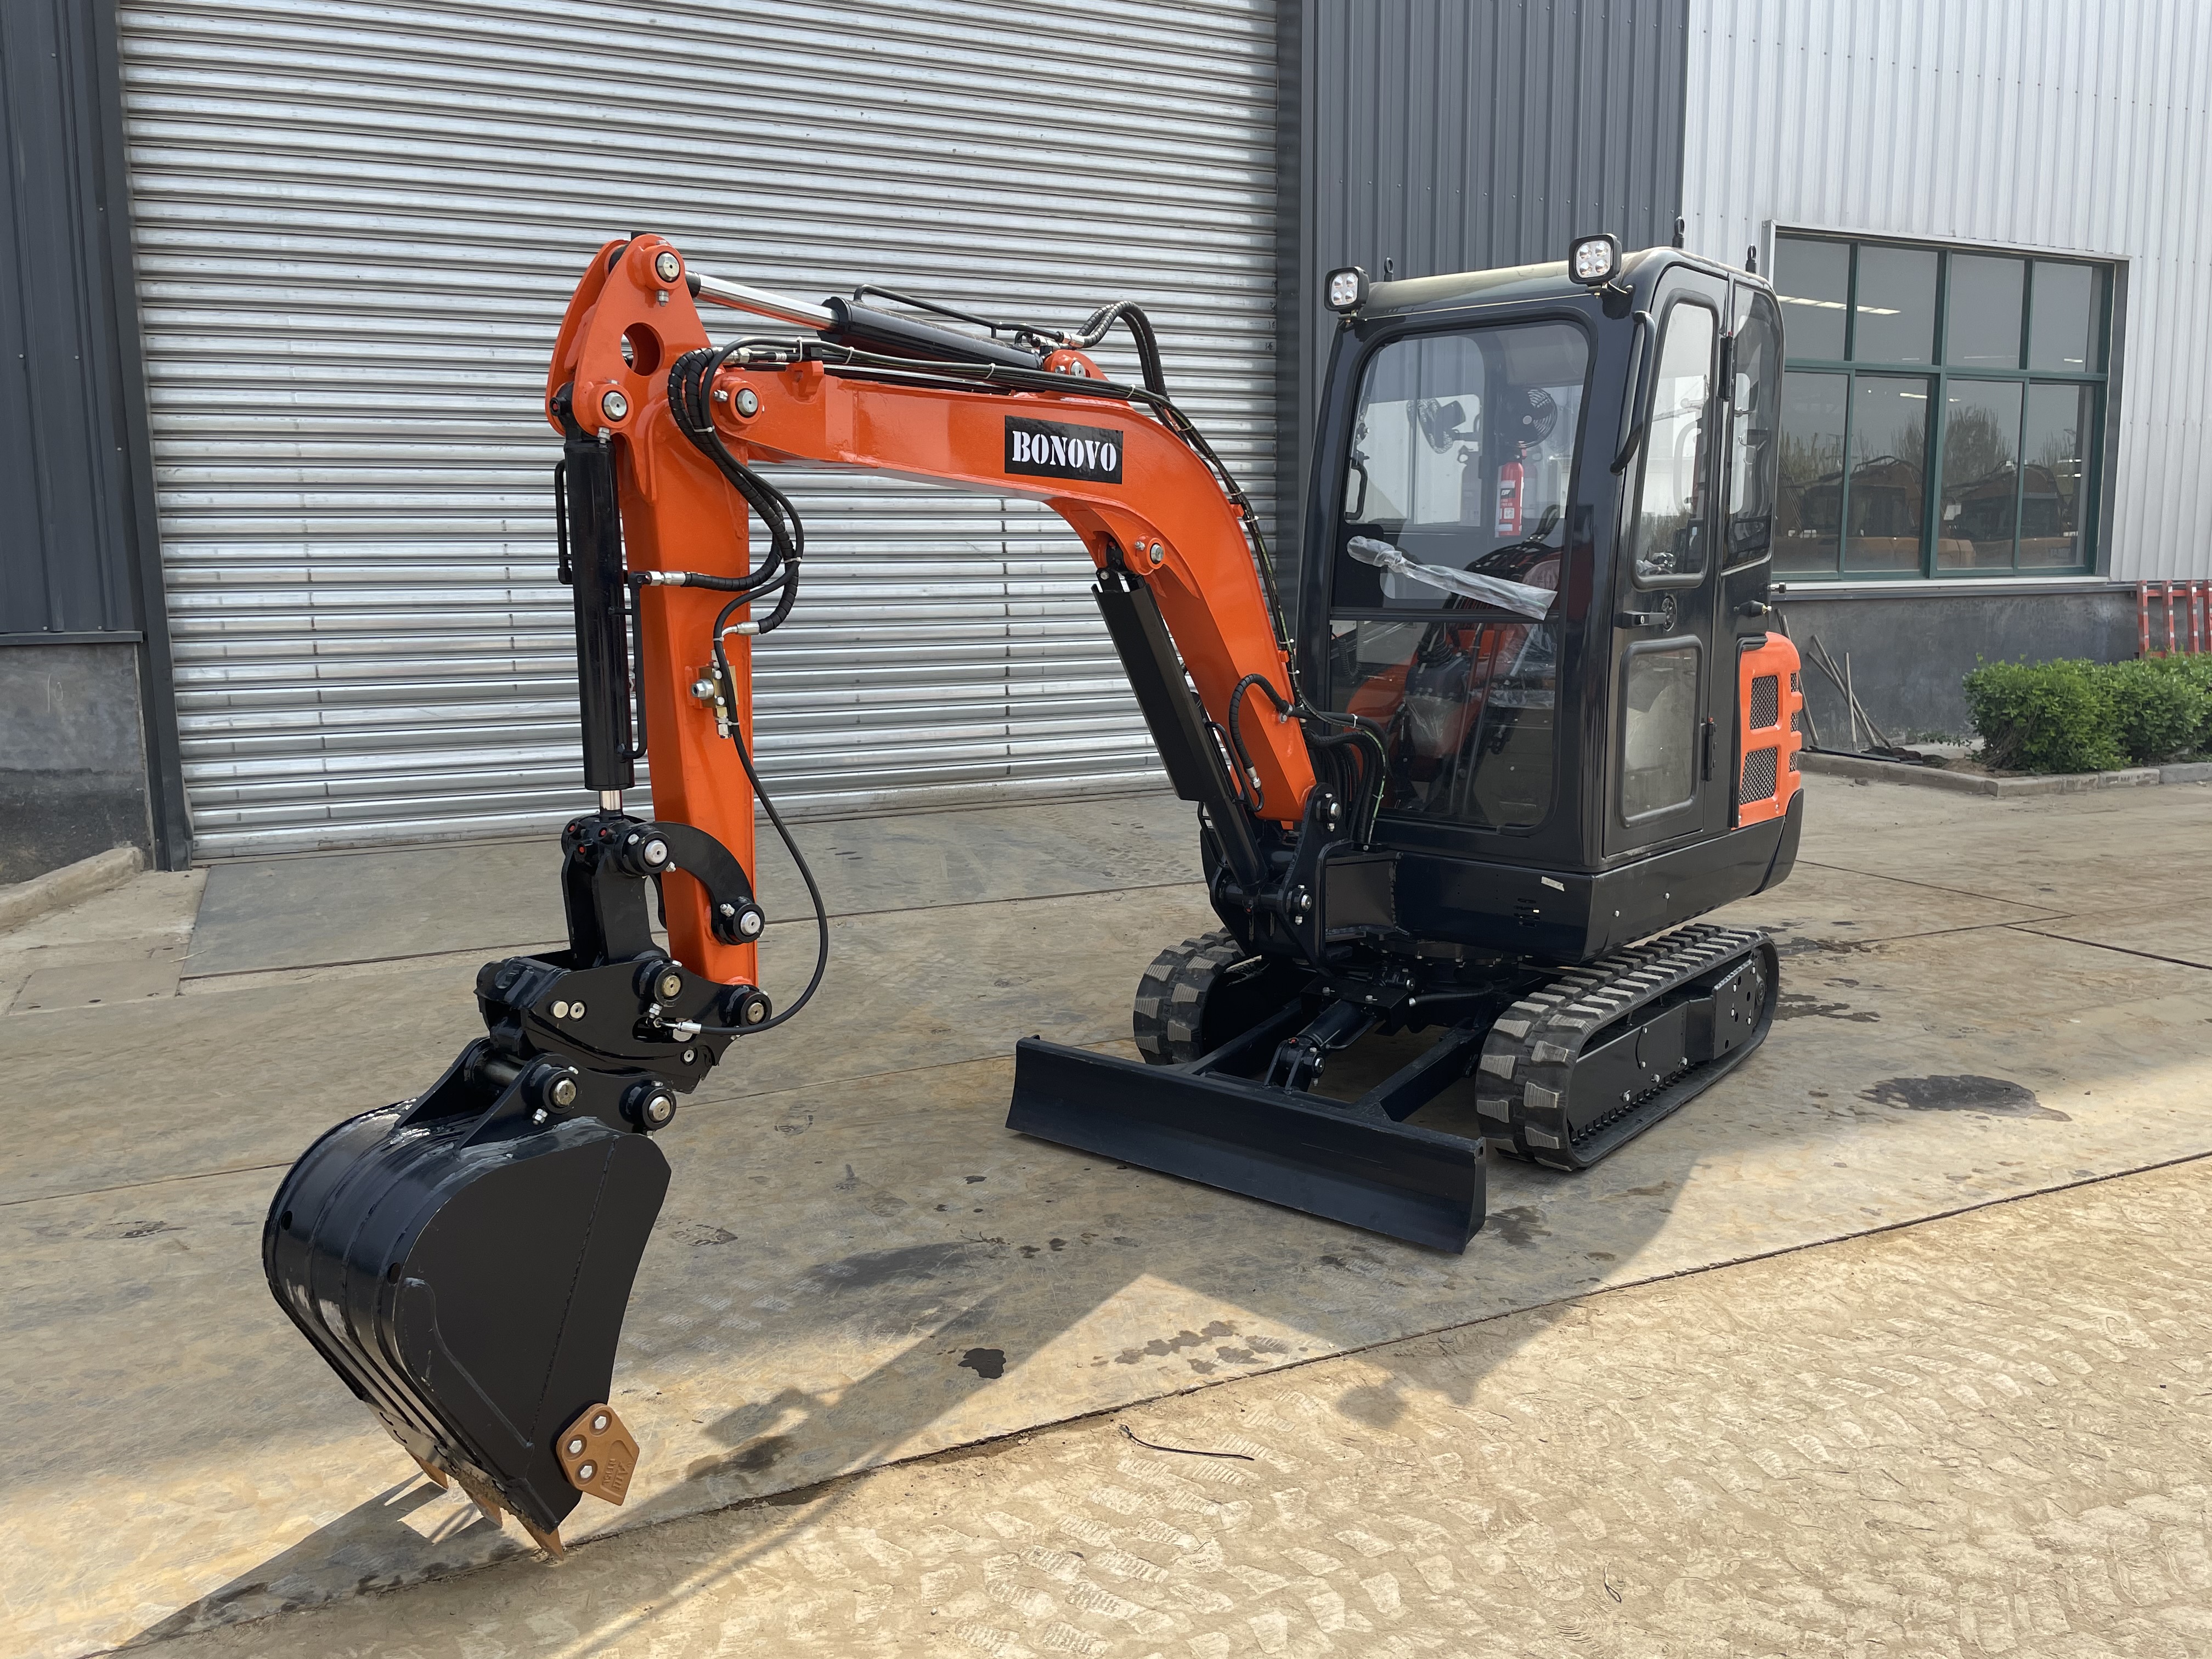 How to buy a mini excavator from China? The definitive guide for 2022